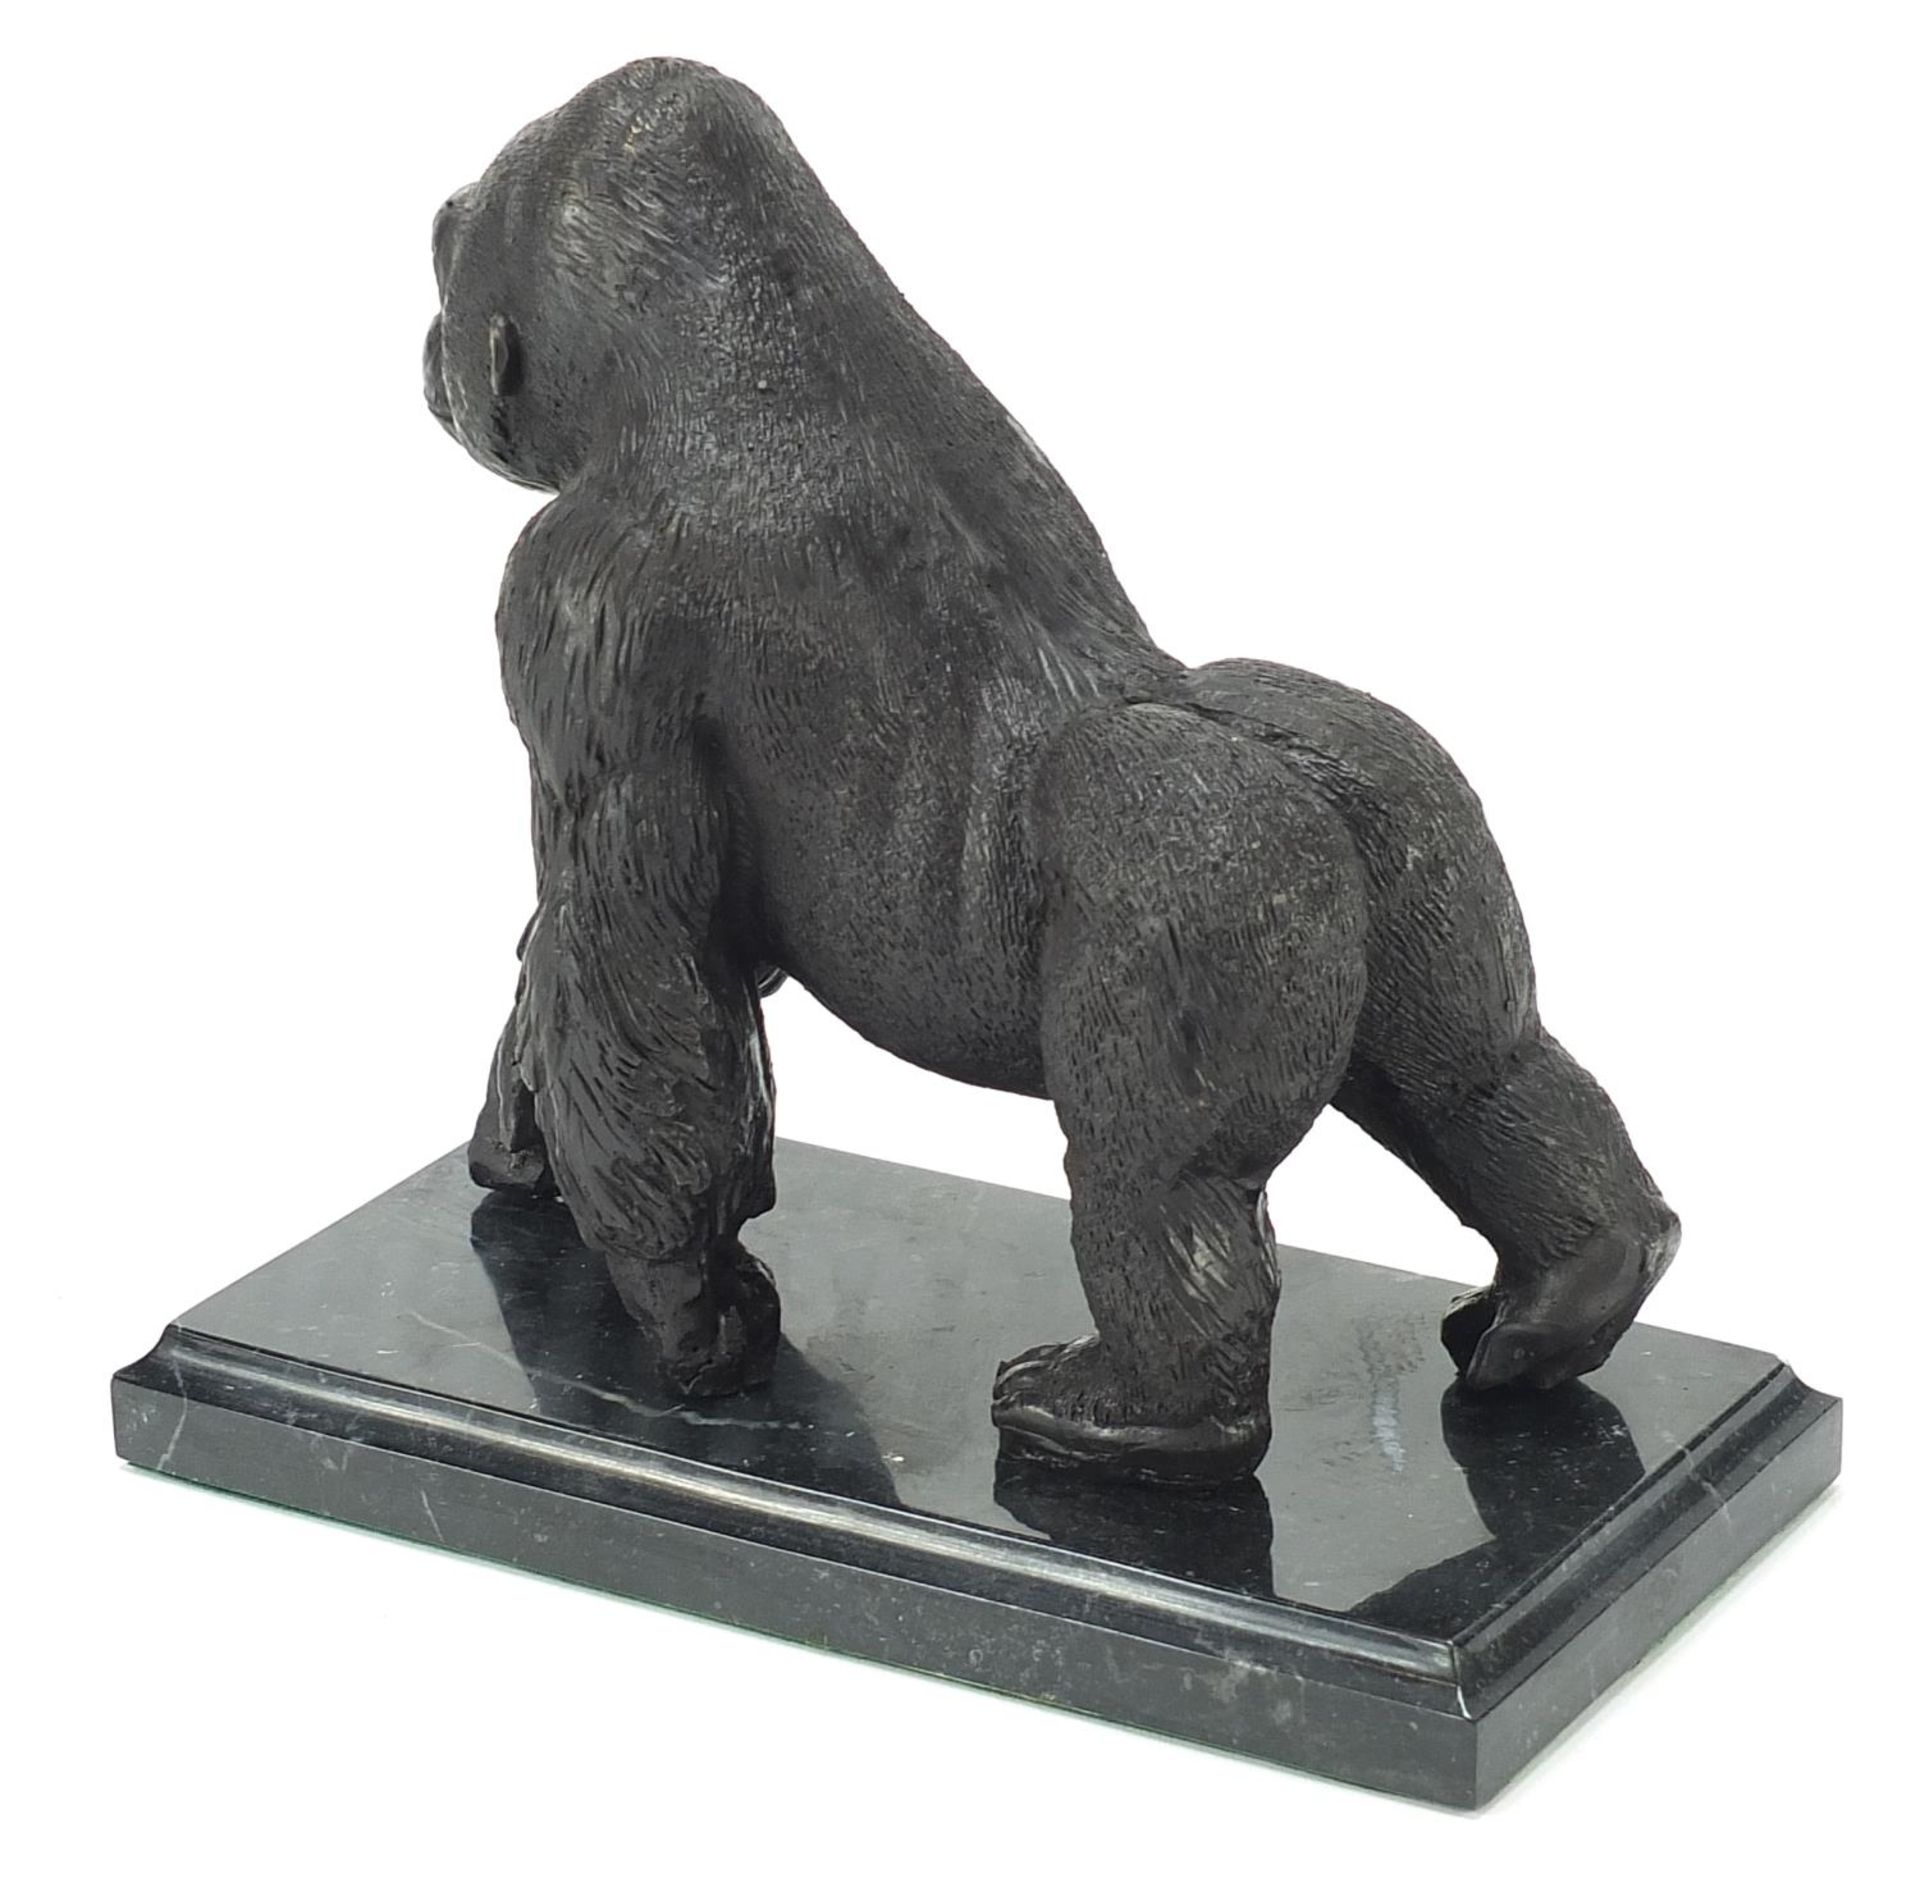 Patinated bronze gorilla raised on a black marble base, 20cm in length - Image 2 of 3